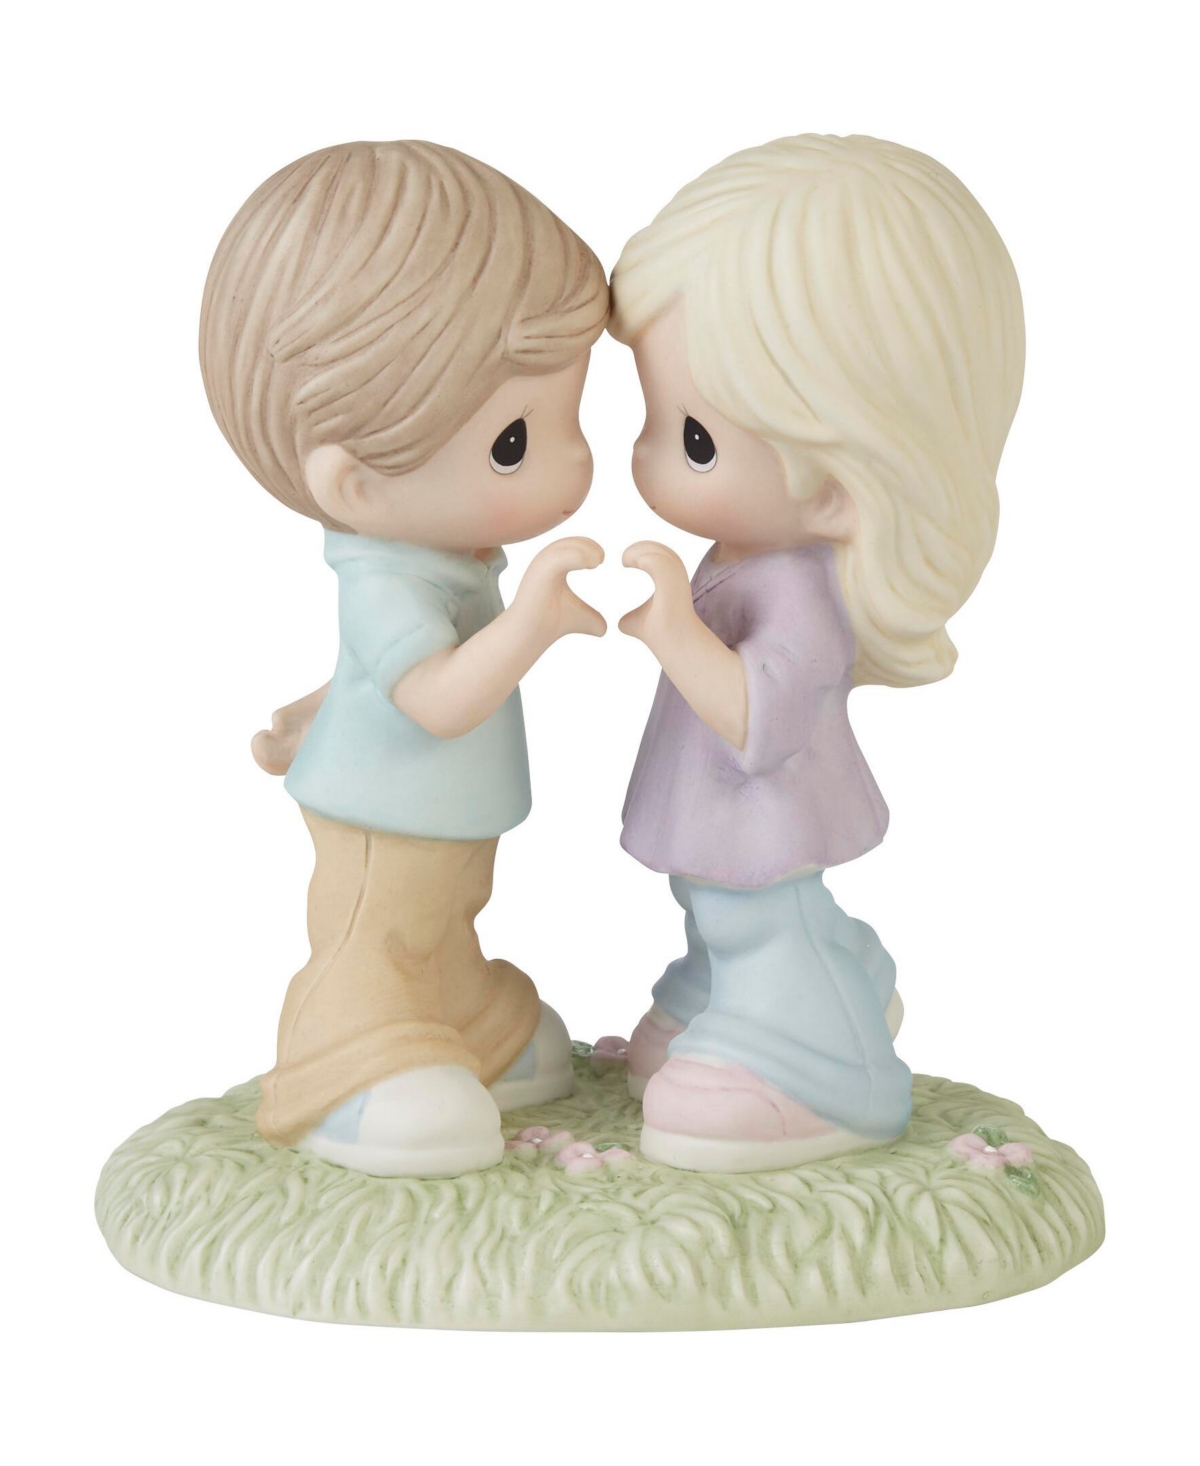 Precious Moments Love Will Keep Us Together Bisque Porcelain Figurine In Multicolored